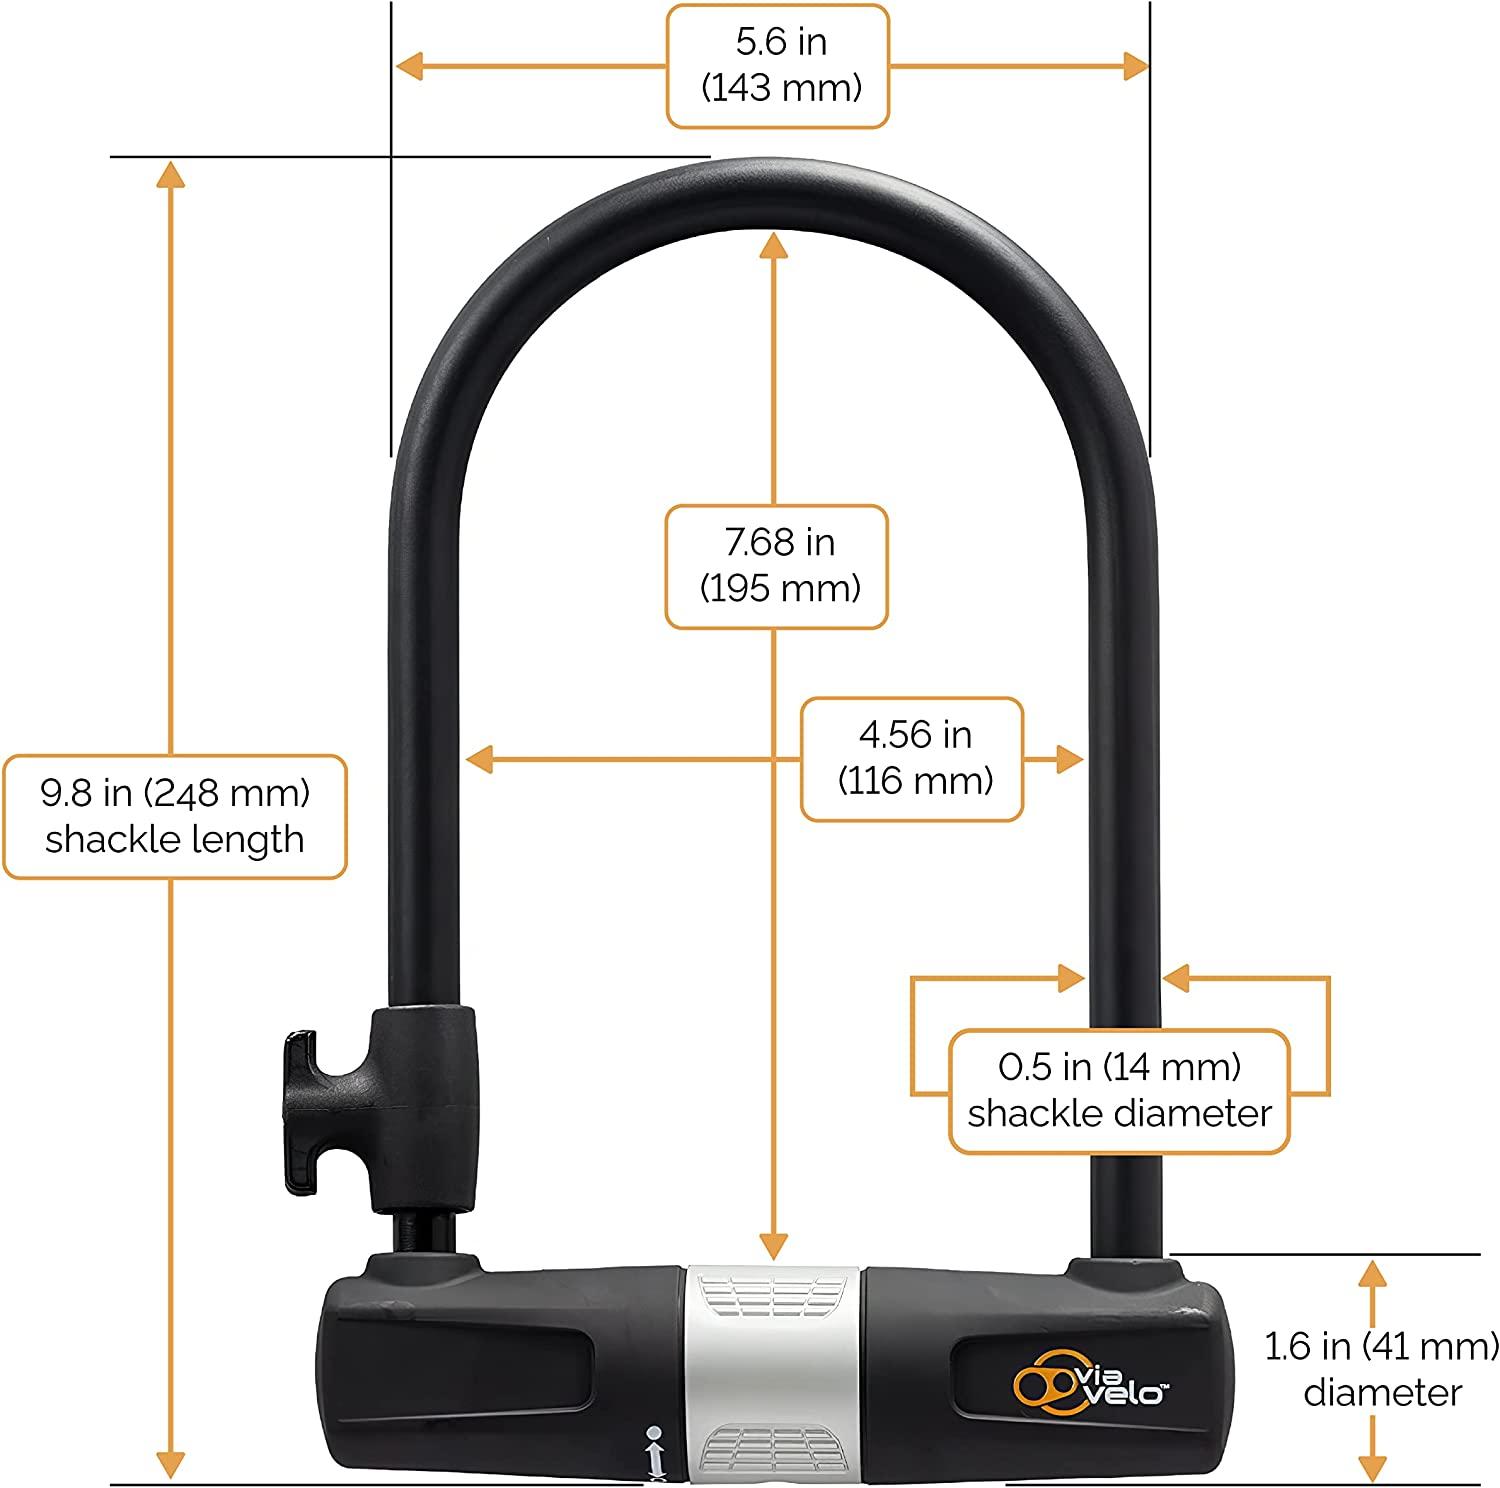 Bike Locks-Why Do You Need Them & Which One Should You Choose - ViaVelo